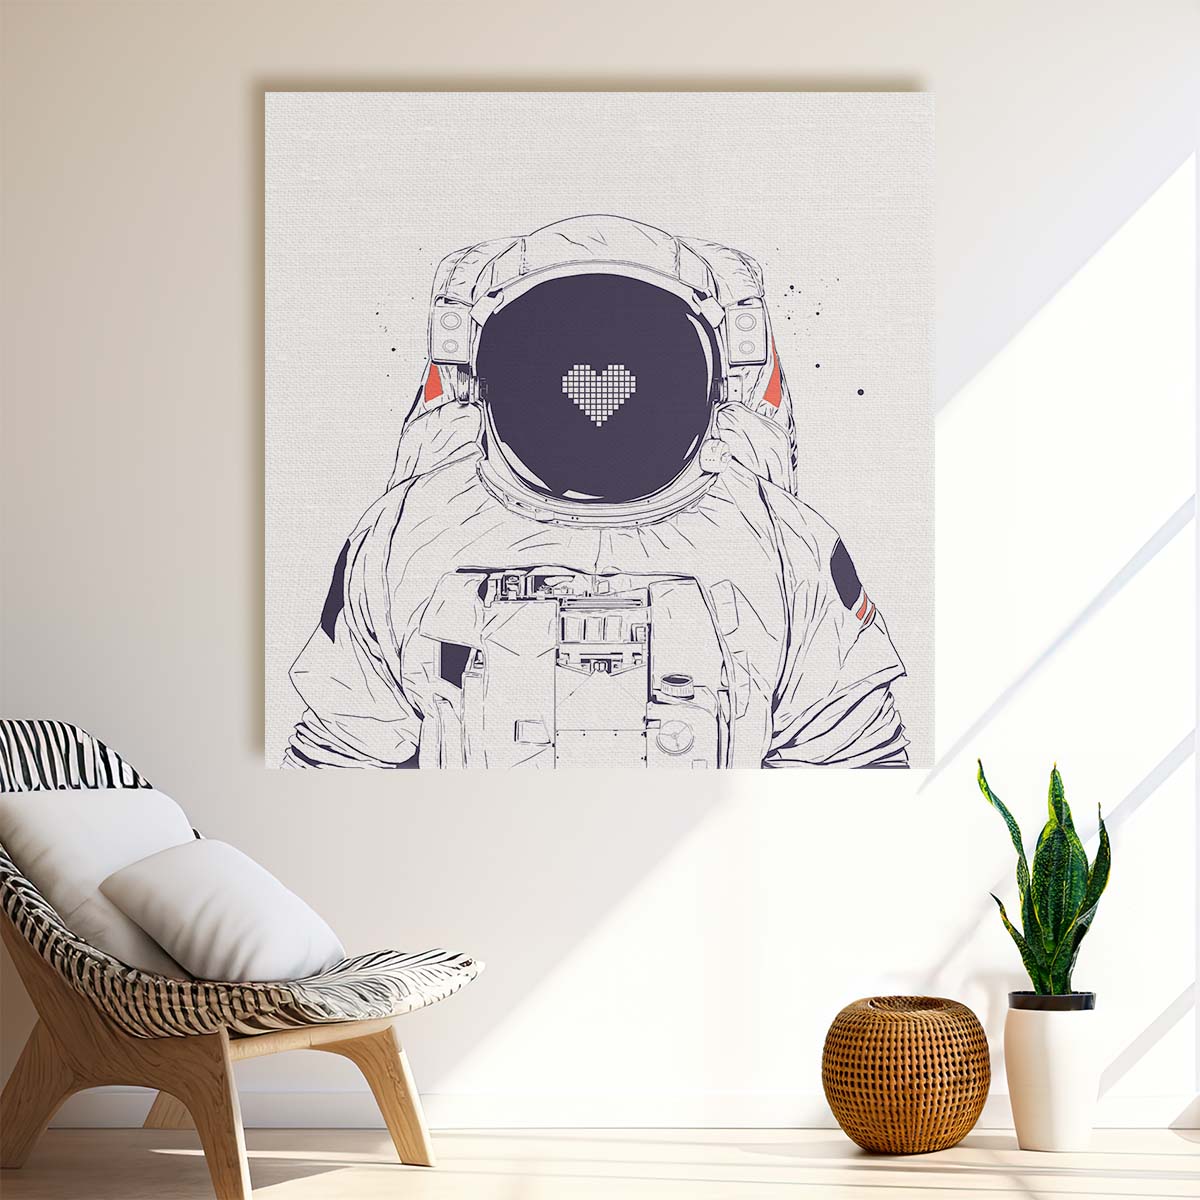 Starry Sky Embrace Romantic Astronaut Couple Illustration Wall Art by Luxuriance Designs. Made in USA.